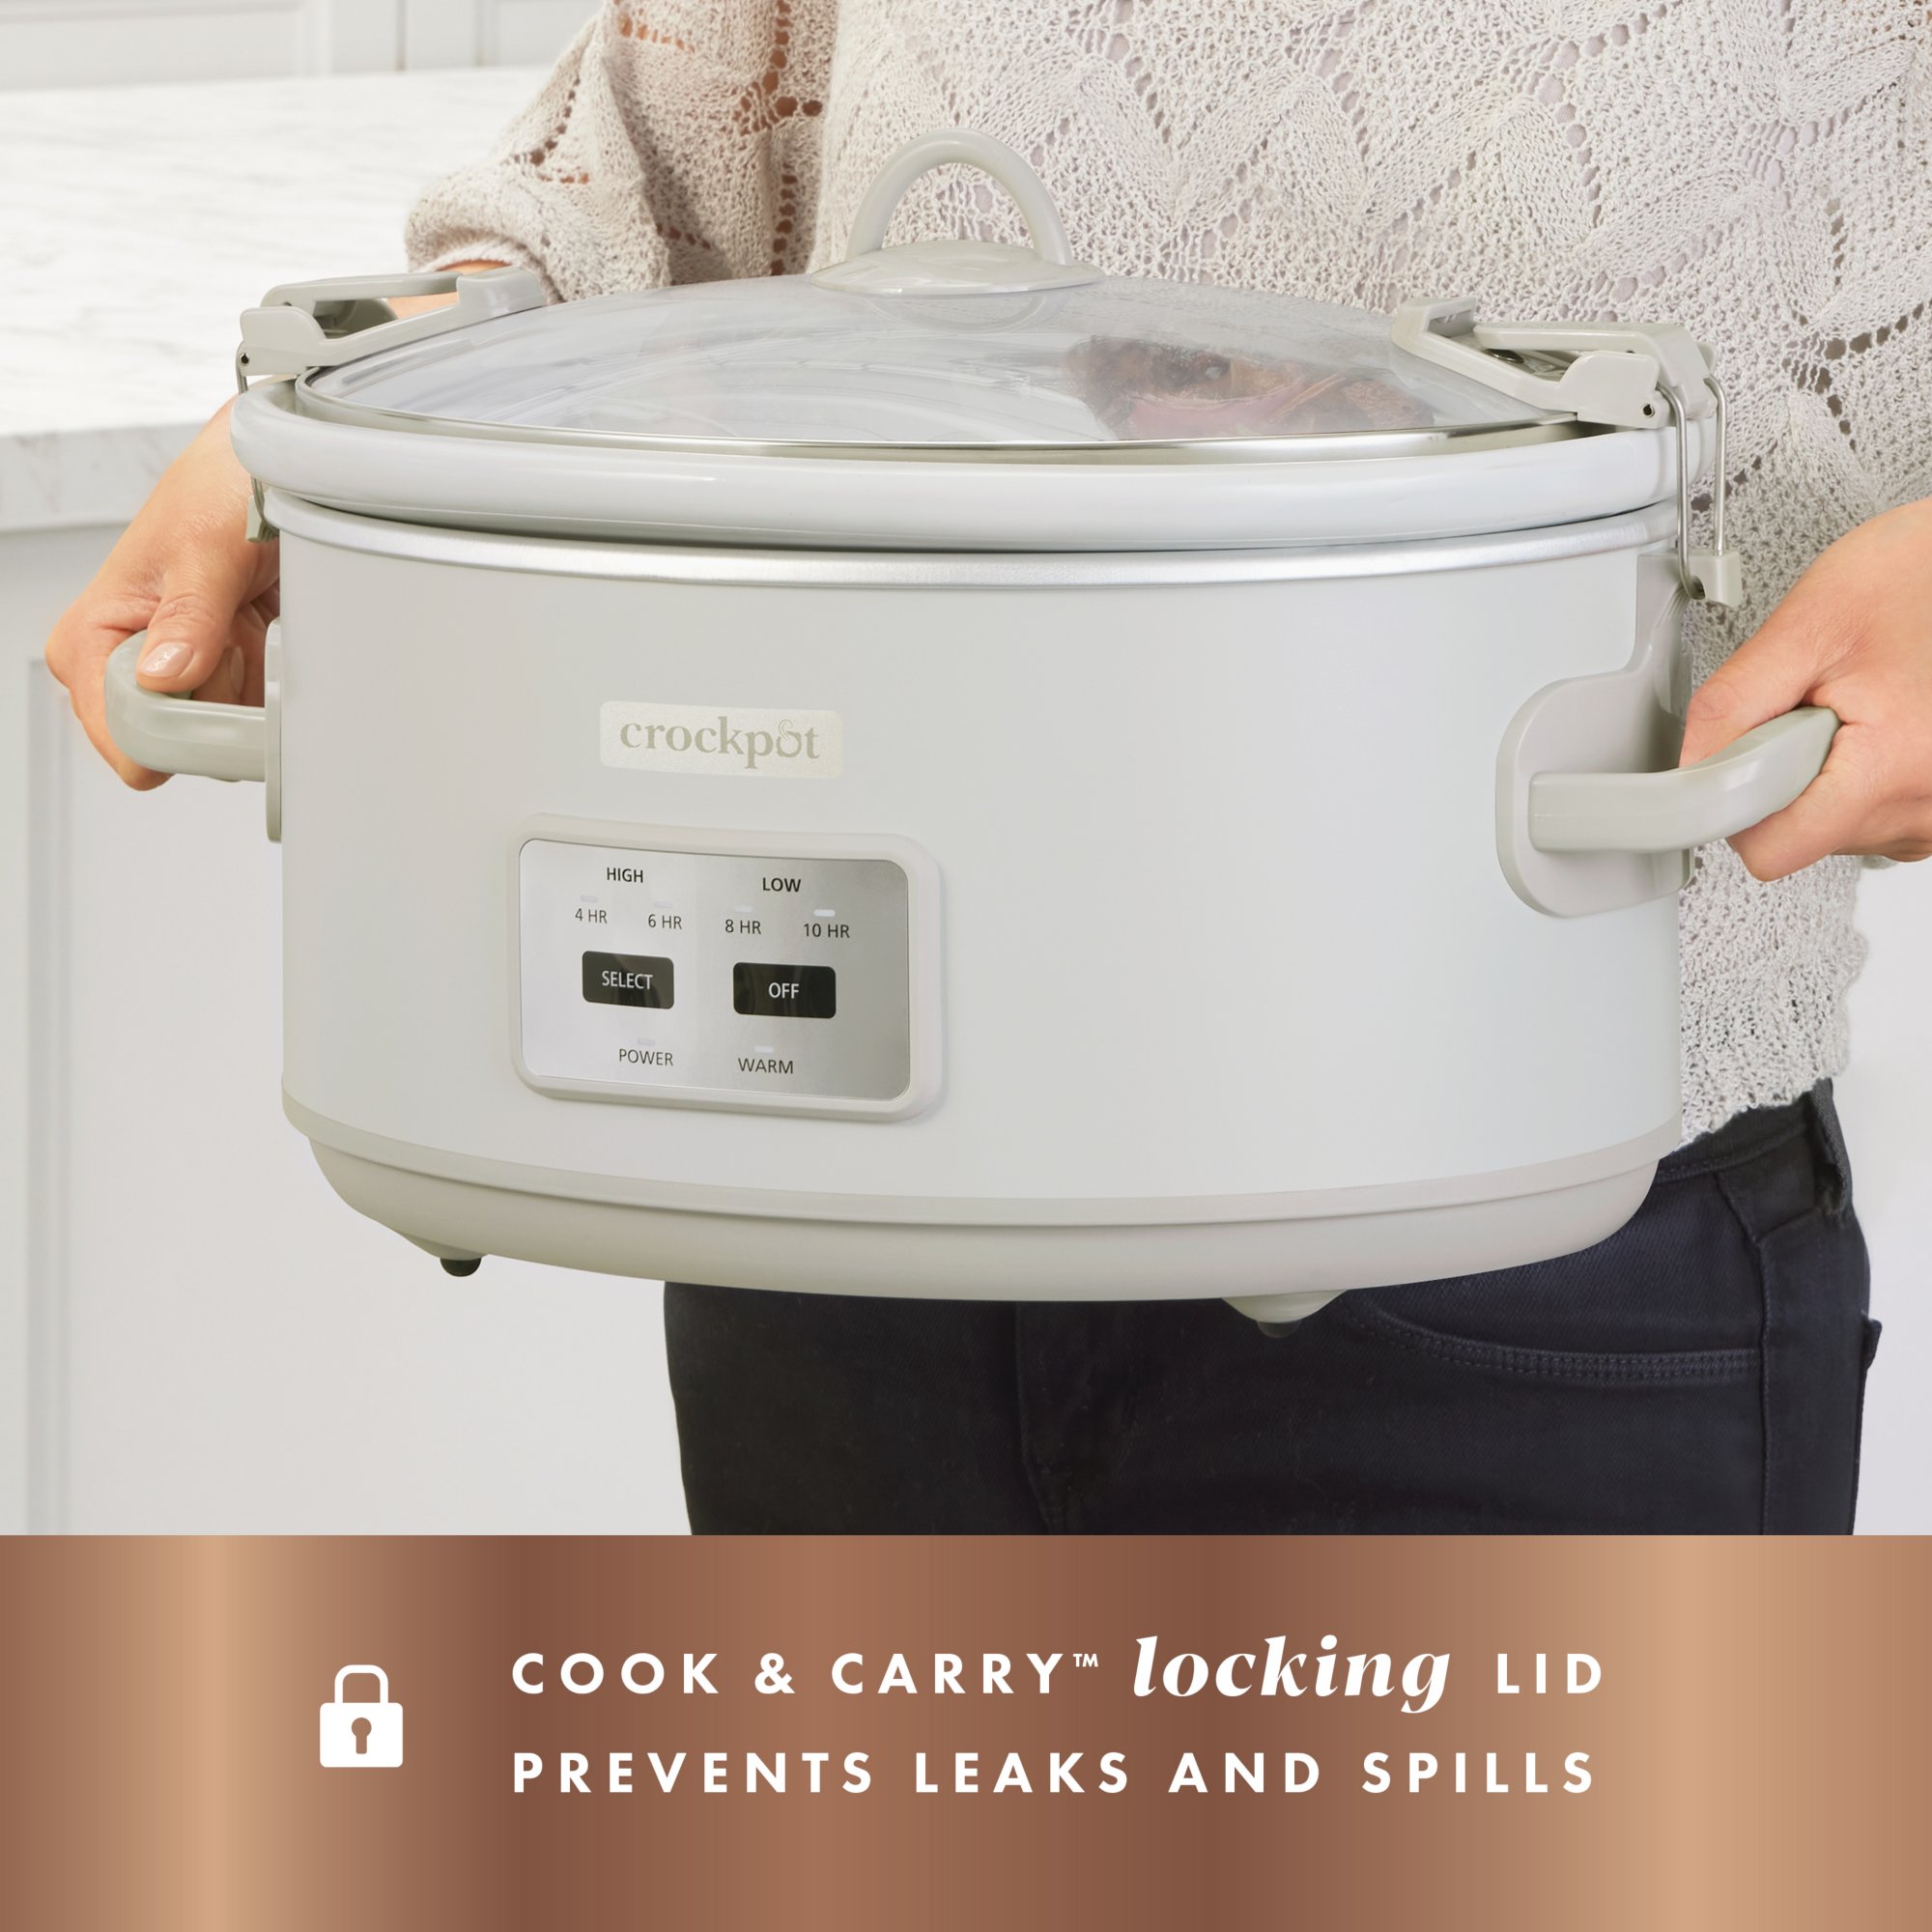 Crock Pot Caddy and Caddy Lid Lock Review